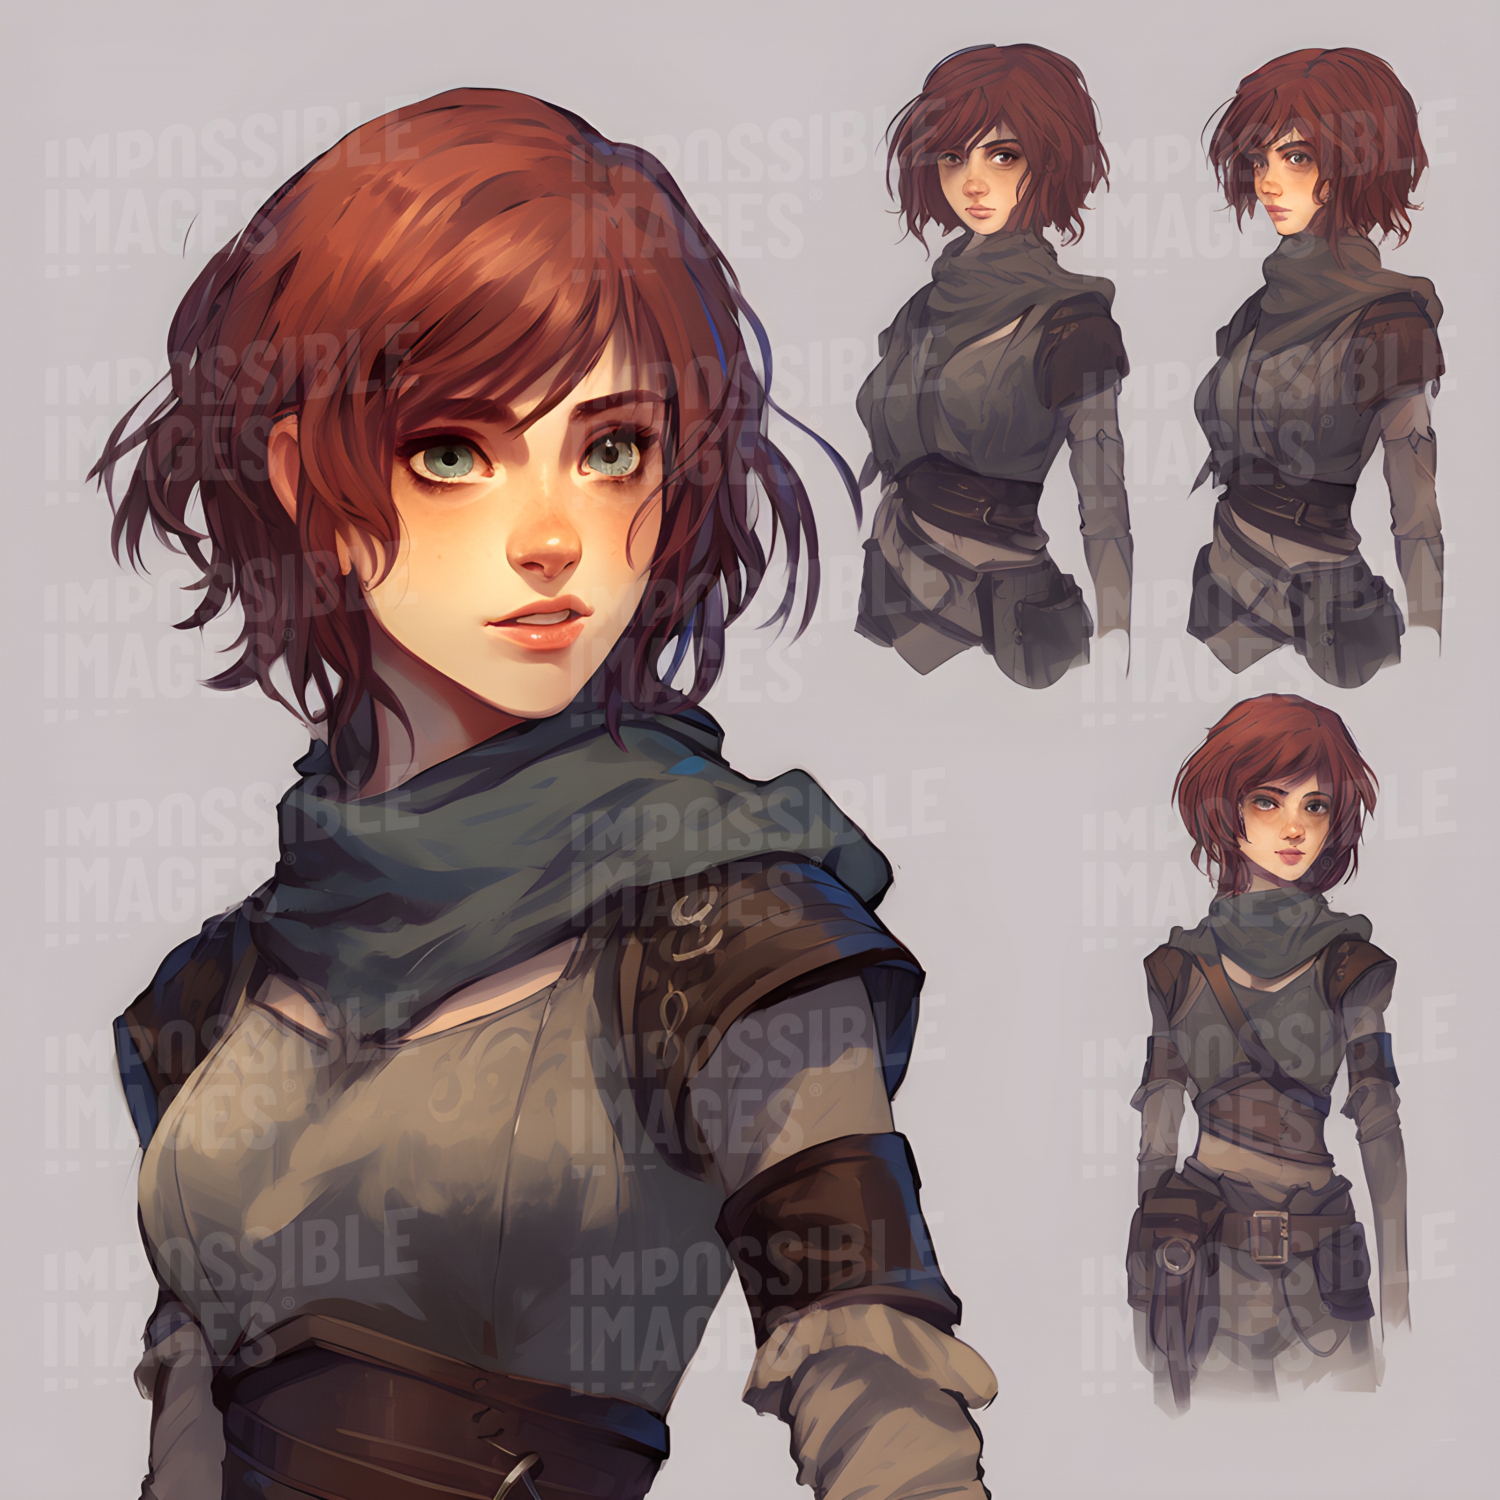 Concept art for an anime fantasy adventuress -  A young female anime character embarks on a thrilling fantasy adventure, with concept art depicting her journey.